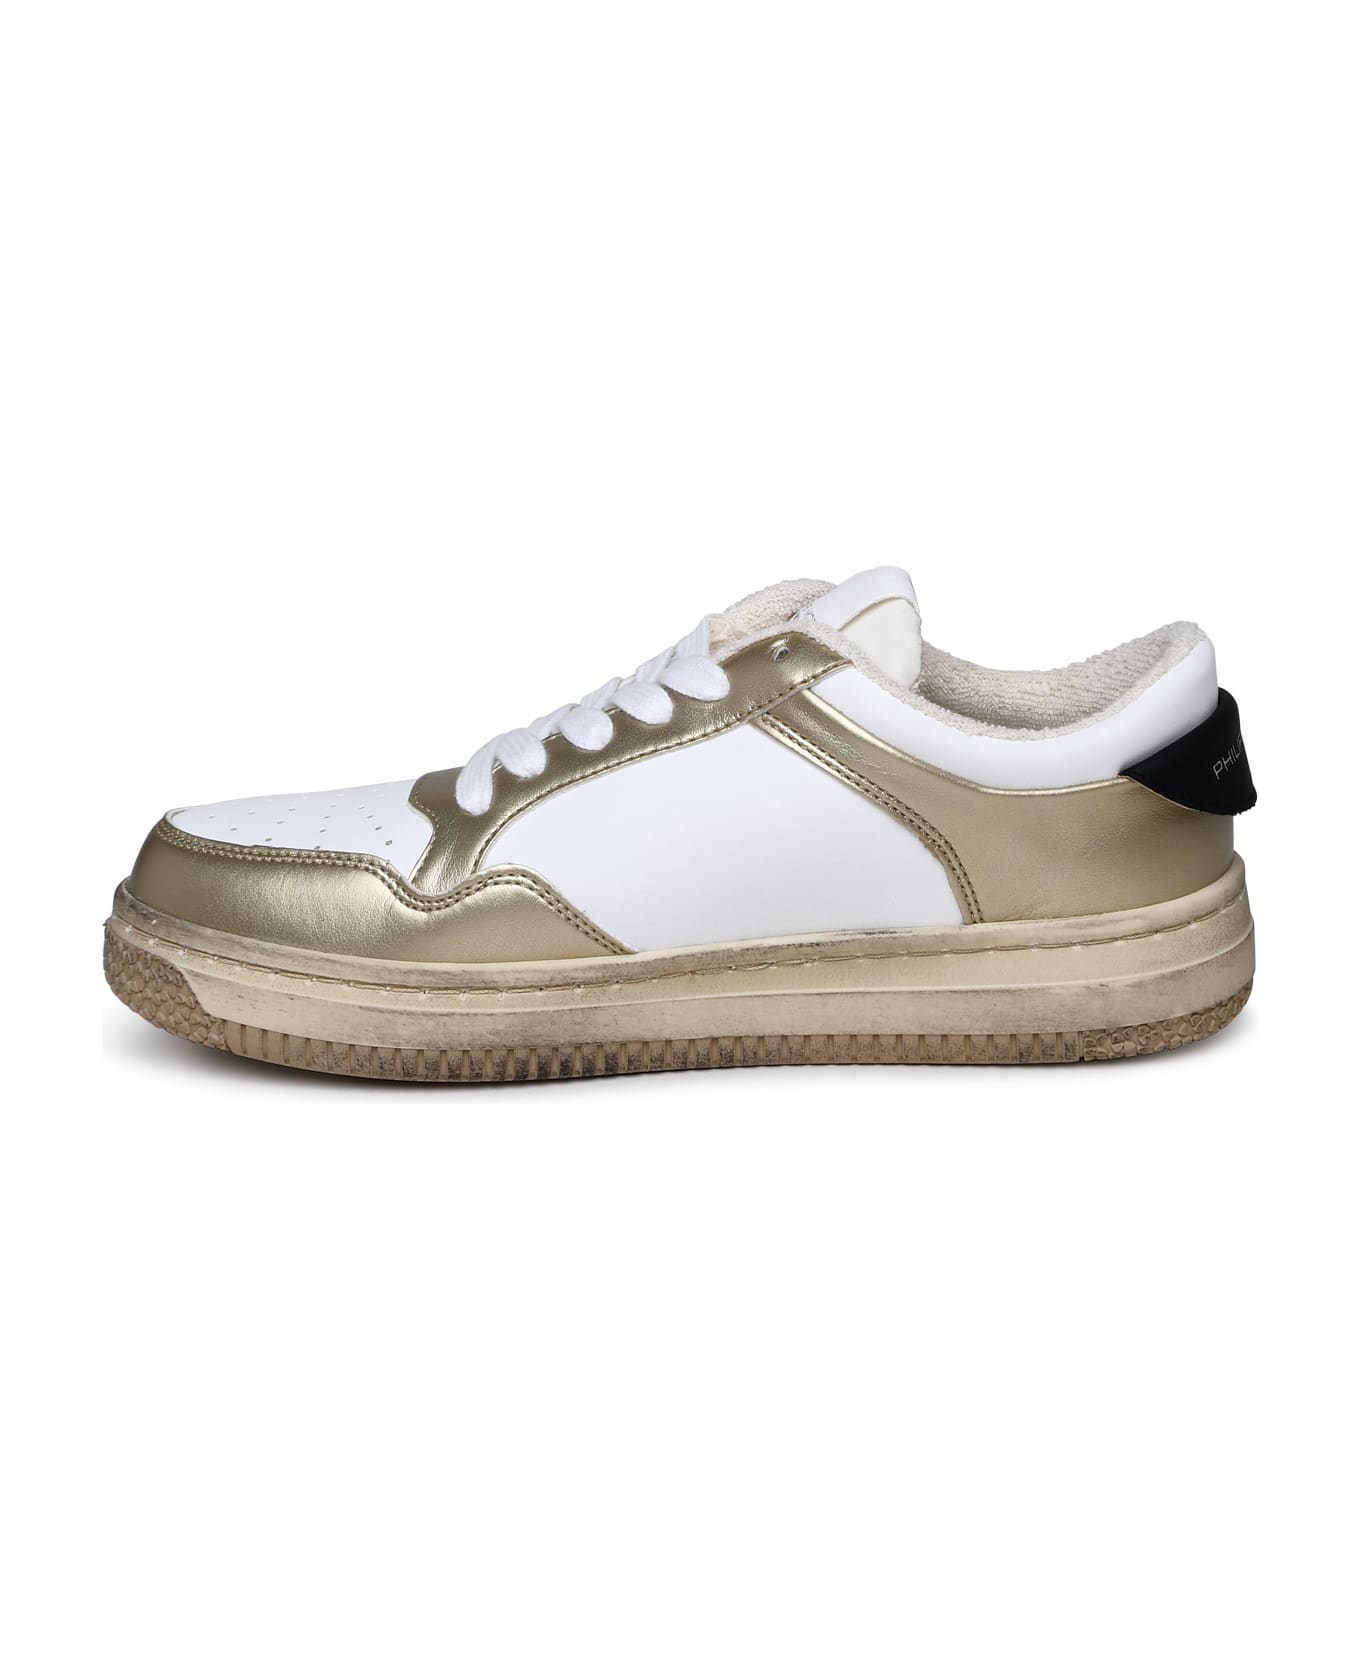 Philippe Model Lion Sneakers In Two-tone Polyurethane Blend スニーカー